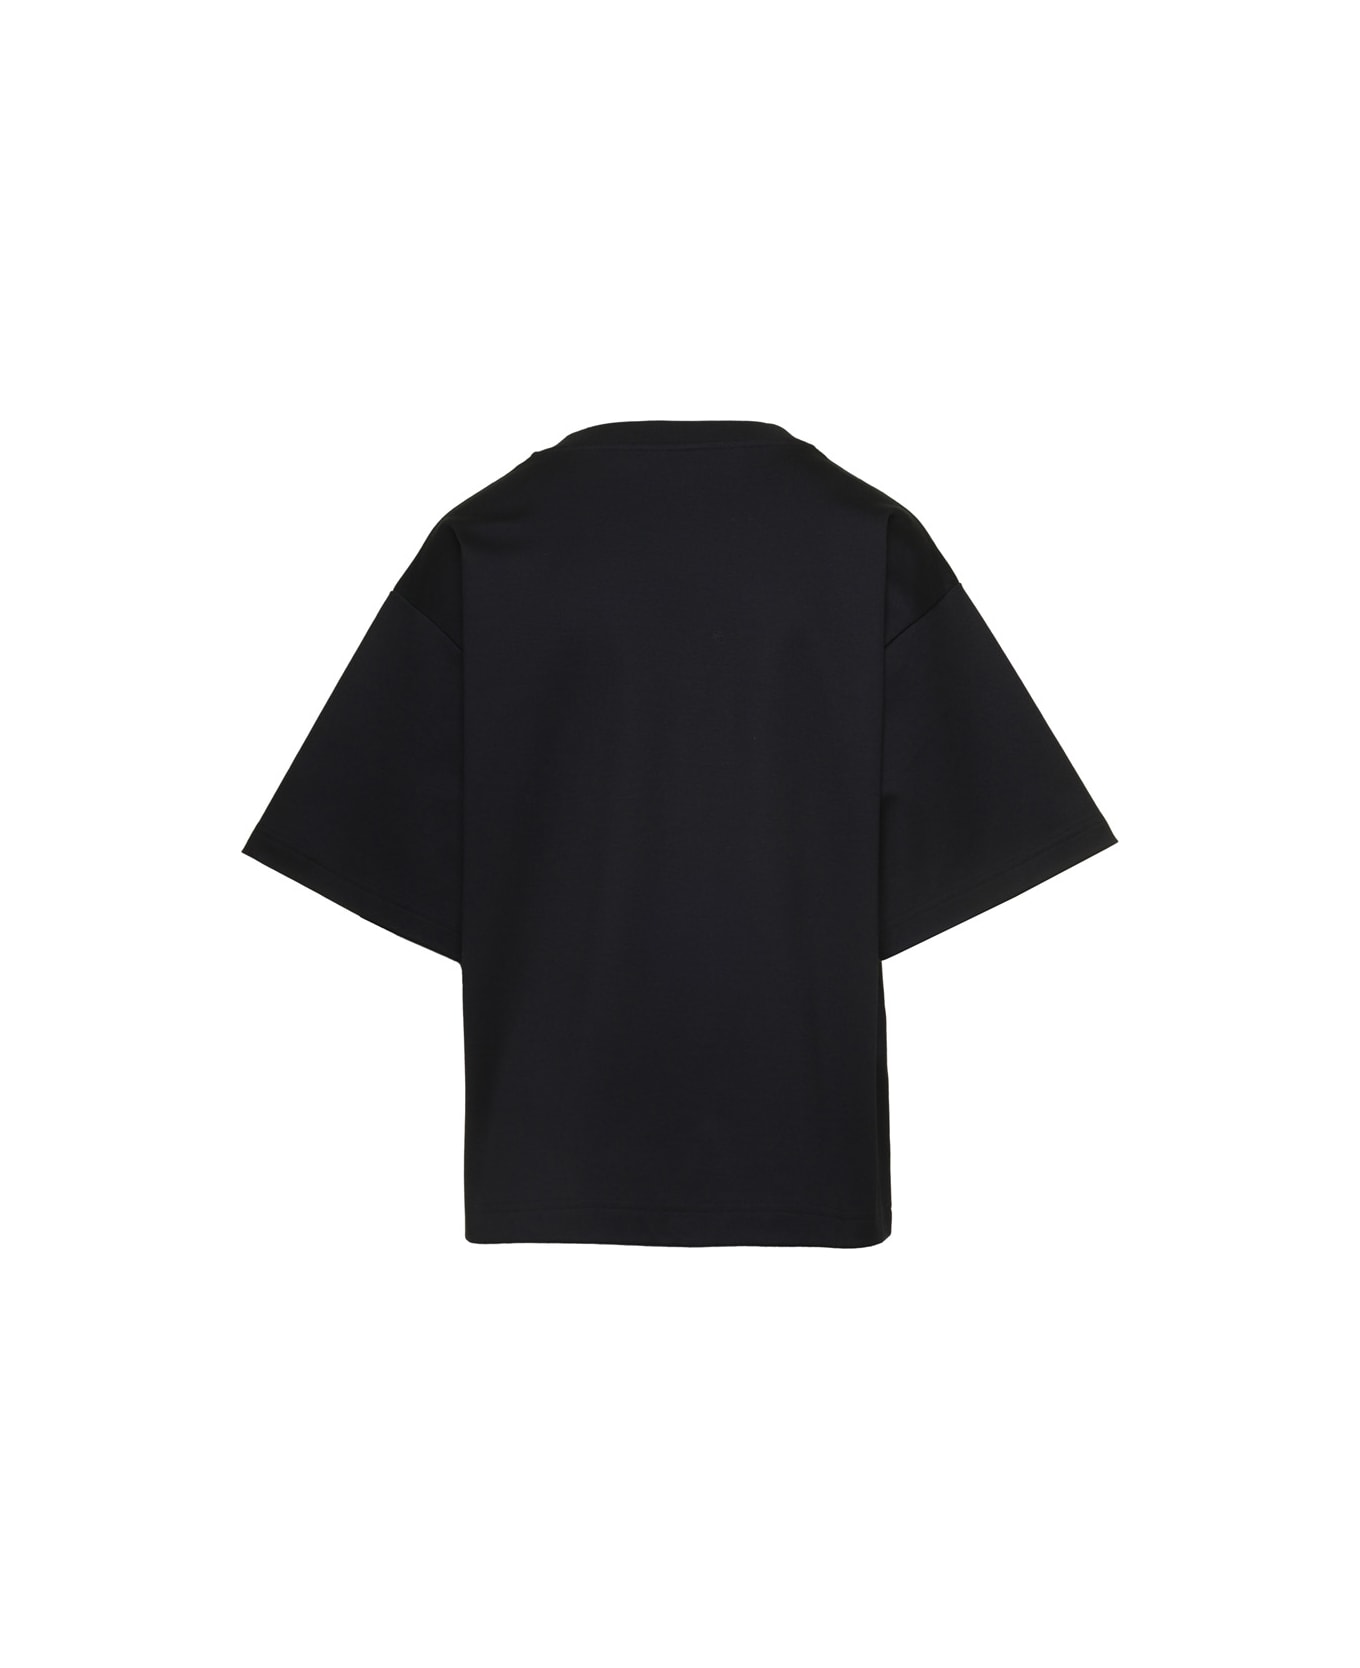 Dolce & Gabbana Black Oversized T-shirt With Logo Lettering Print In Cotton Woman - Black